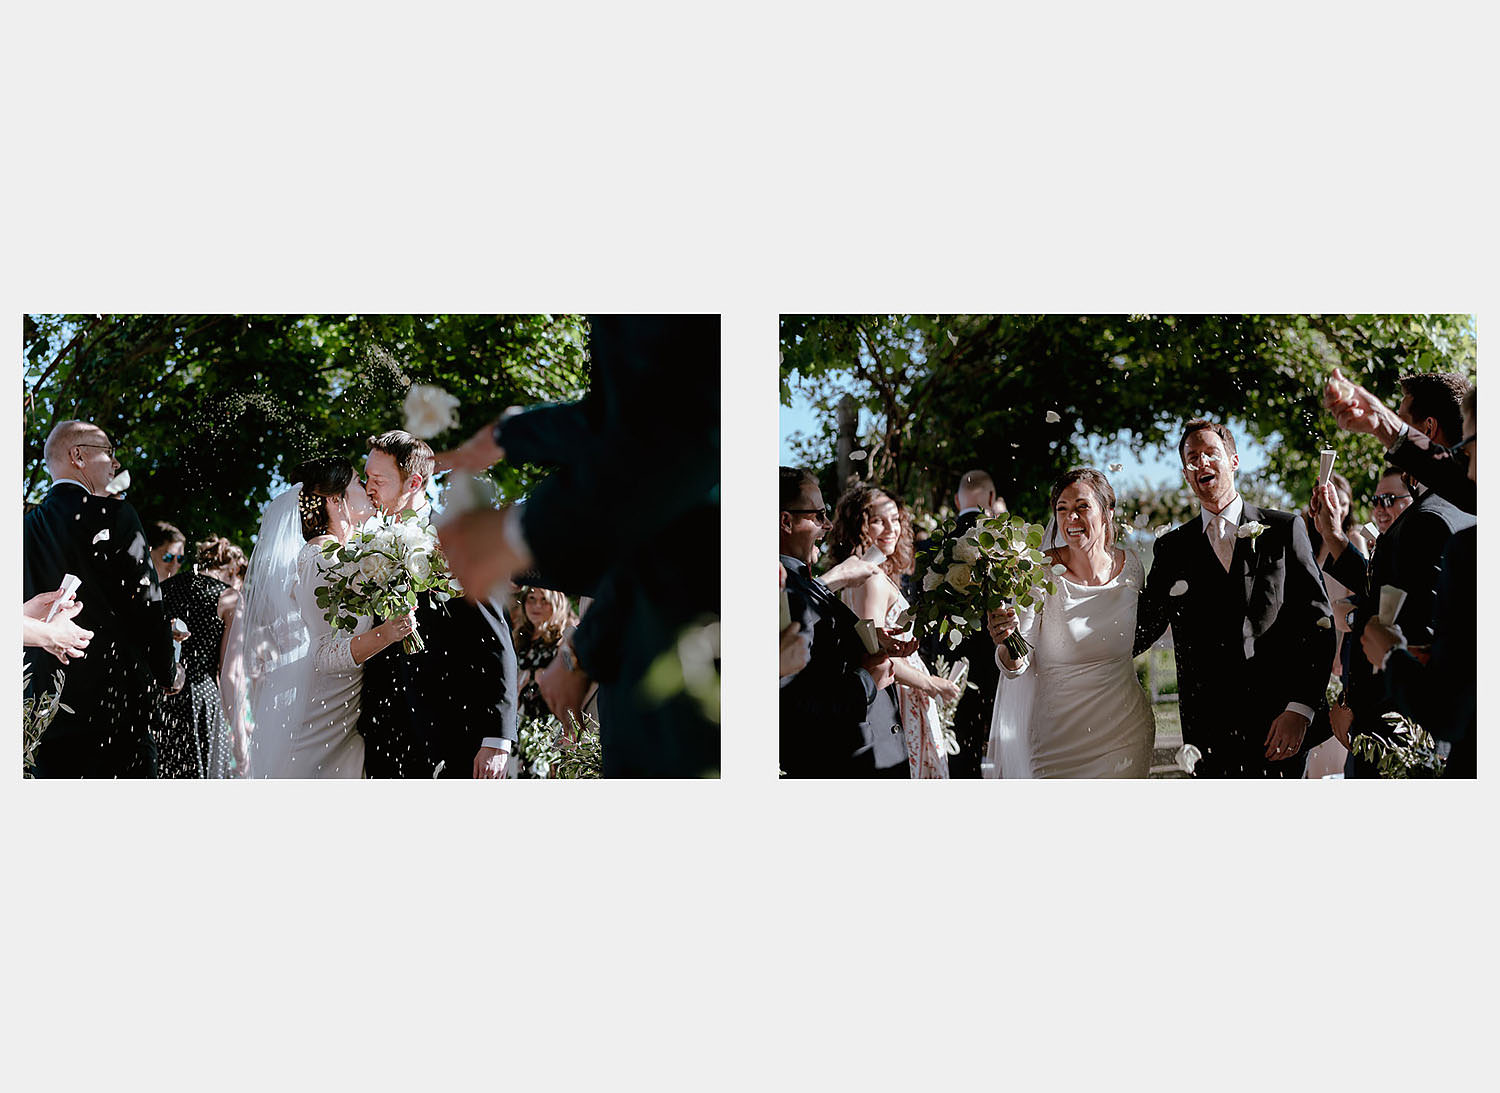 relaxing countryside wedding in tuscany rice petals throwing